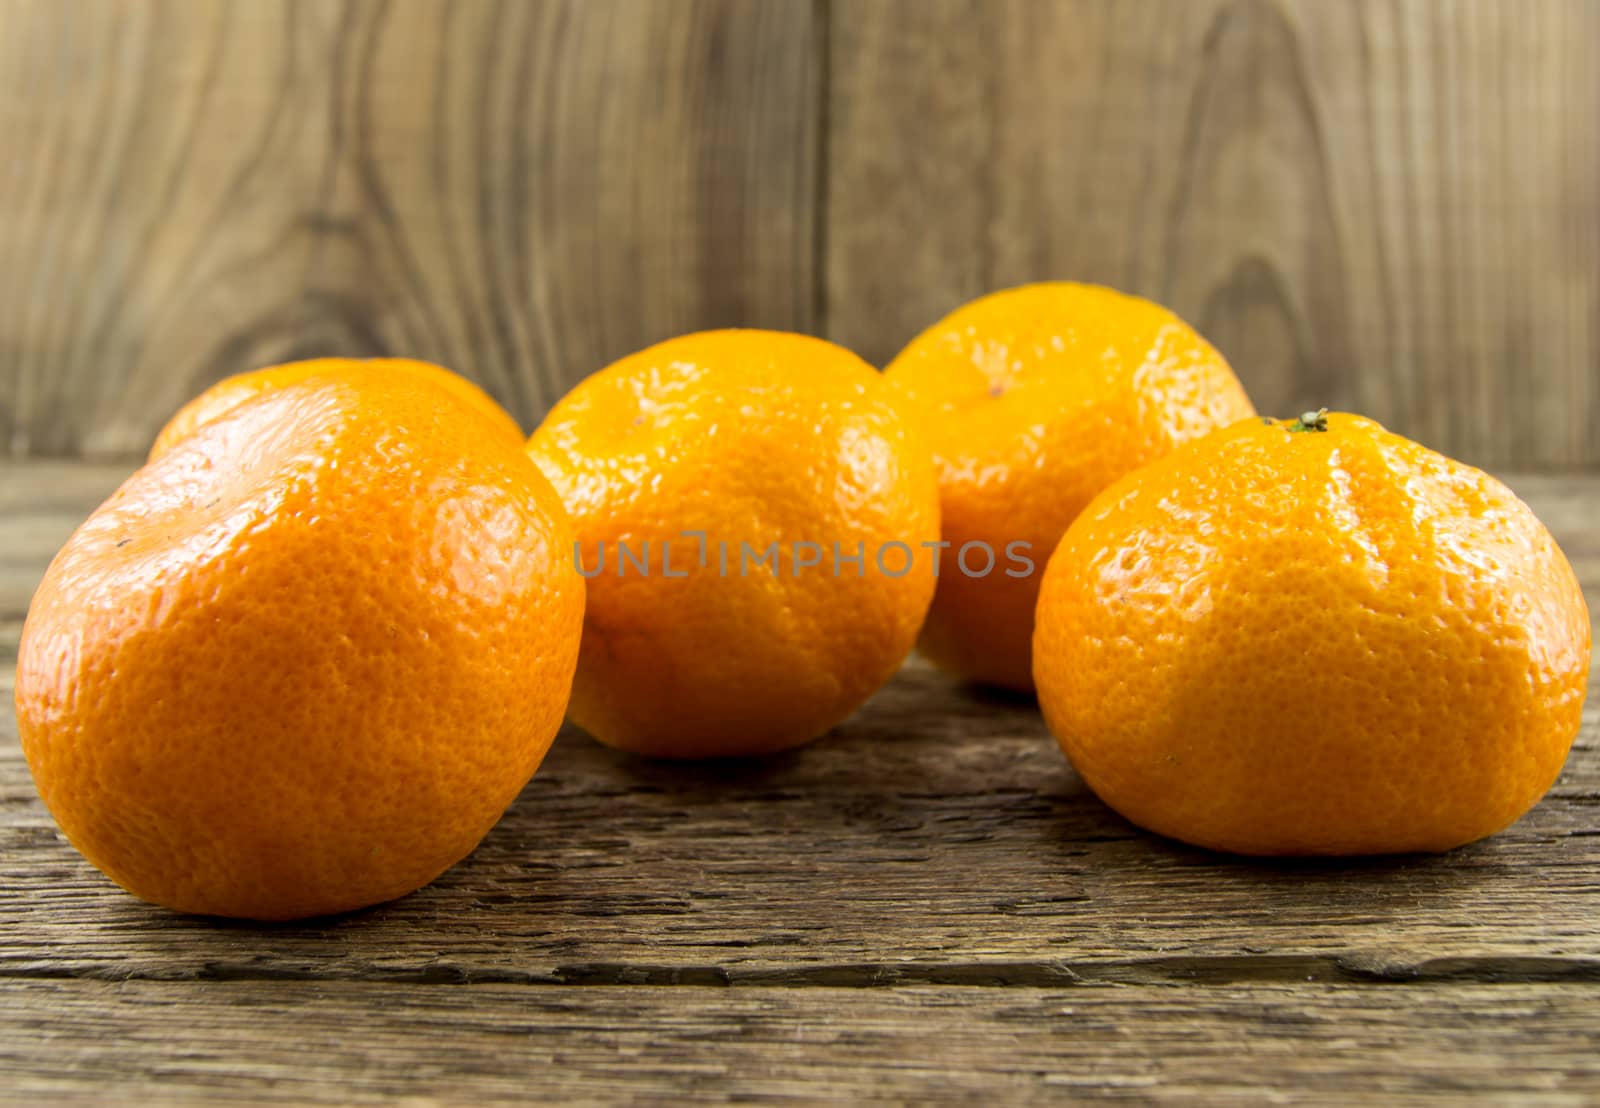 Ripe tangerines lie on a wooden background